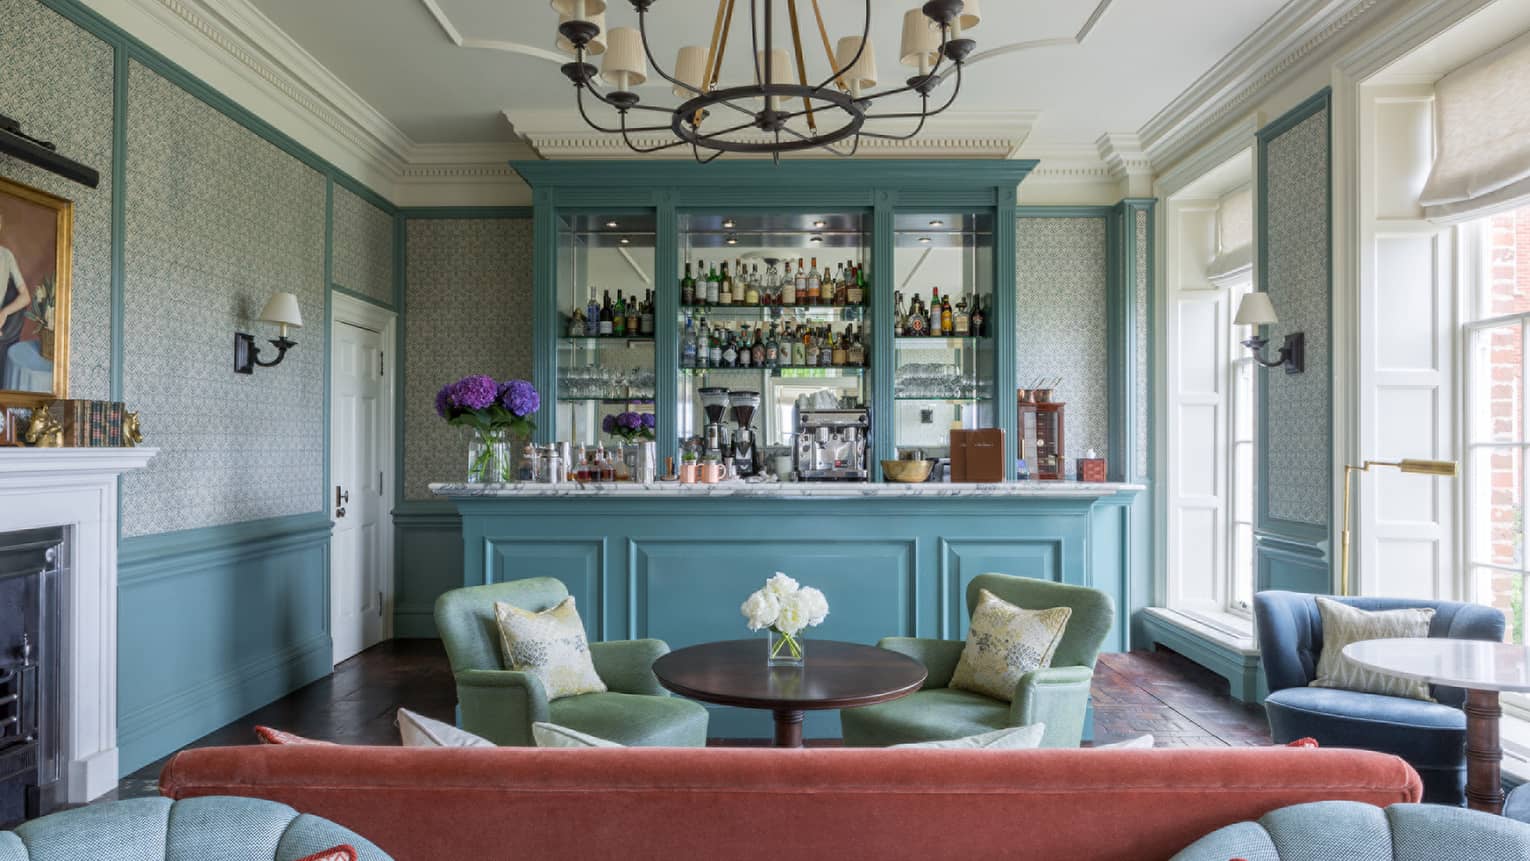 Library and Drawing Room Bar with rose-coloured sofa, lounge seating areas and stocked blue bar on back wall